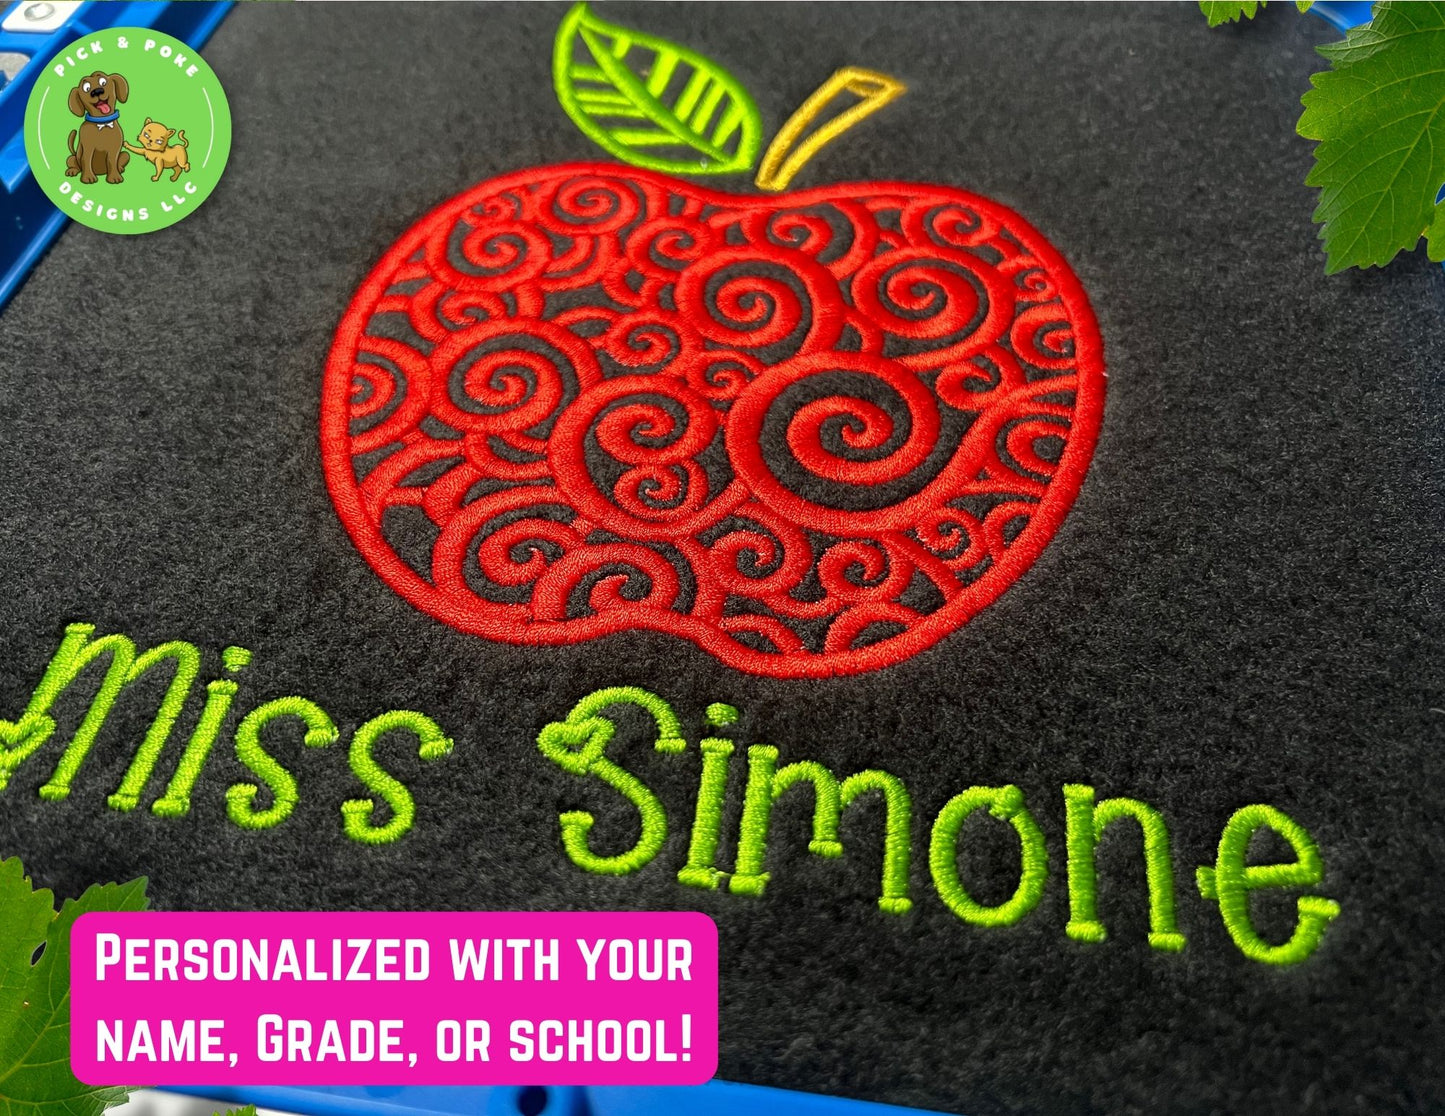 Embroidered teacher apple shirt is personalized with your name, grade level, or school.